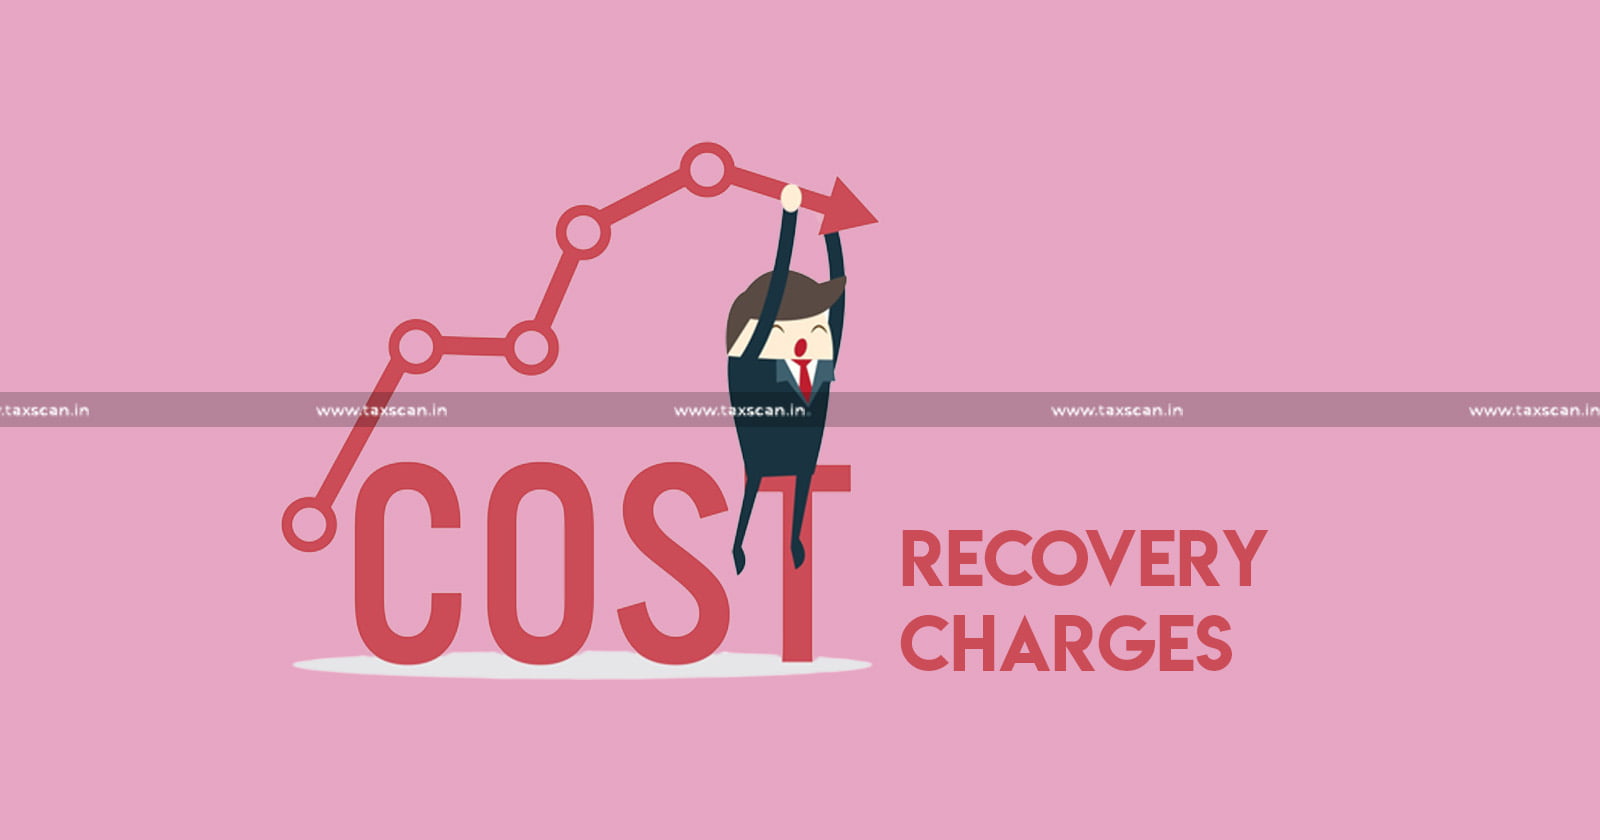 CESTAT - demand - cost recovery charges - Commissioner - taxscan